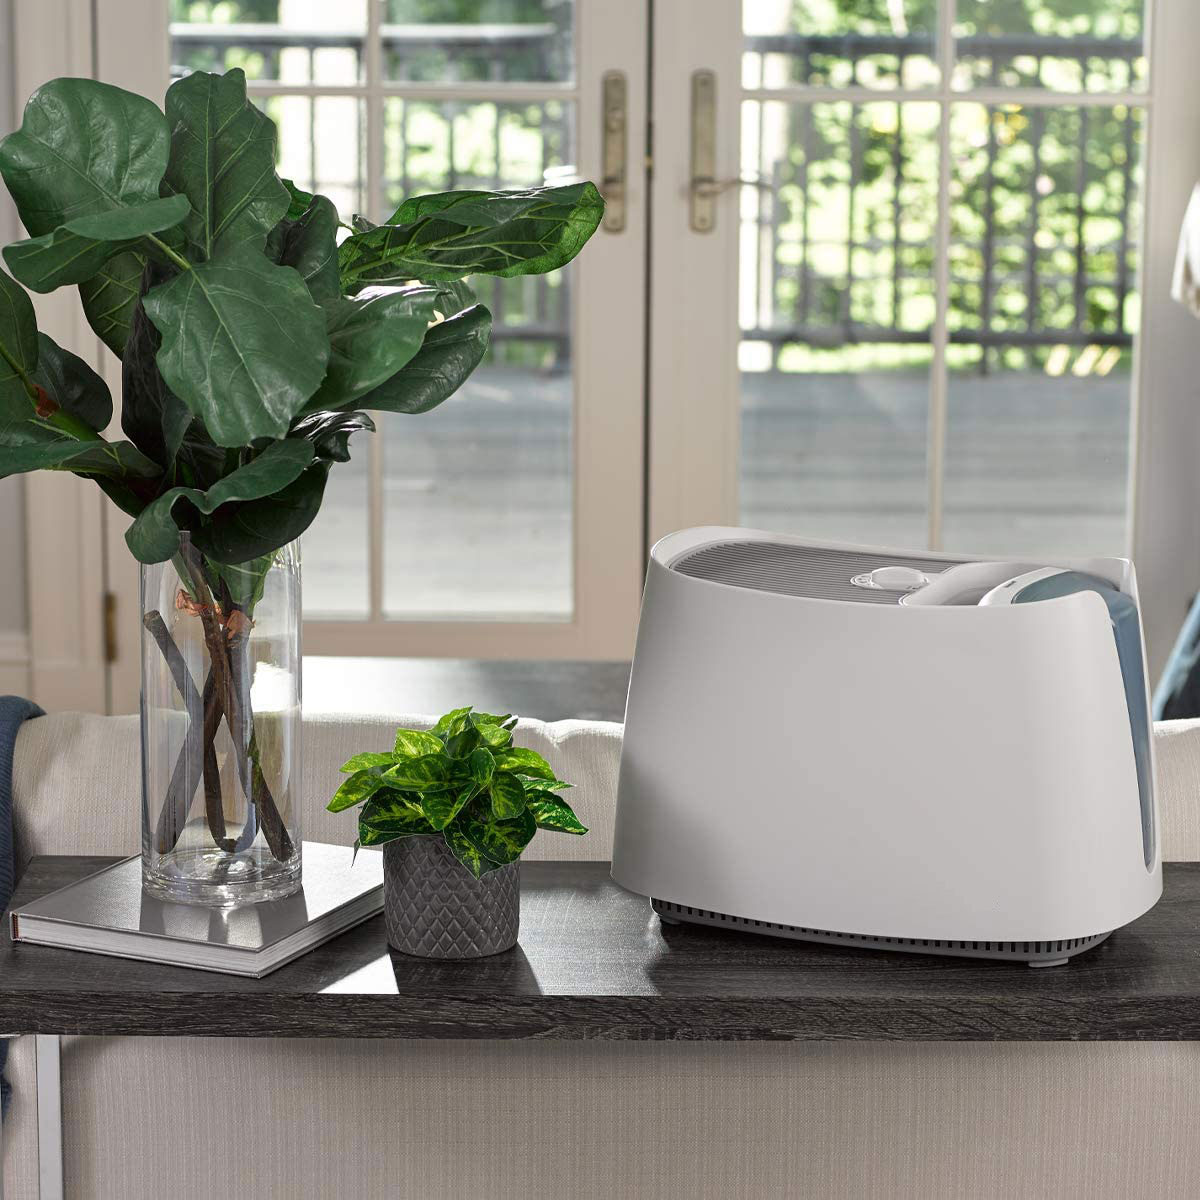 Humidifying is Not Just for the Colder Months, Honeywell Humidifier Benefits All Year Long